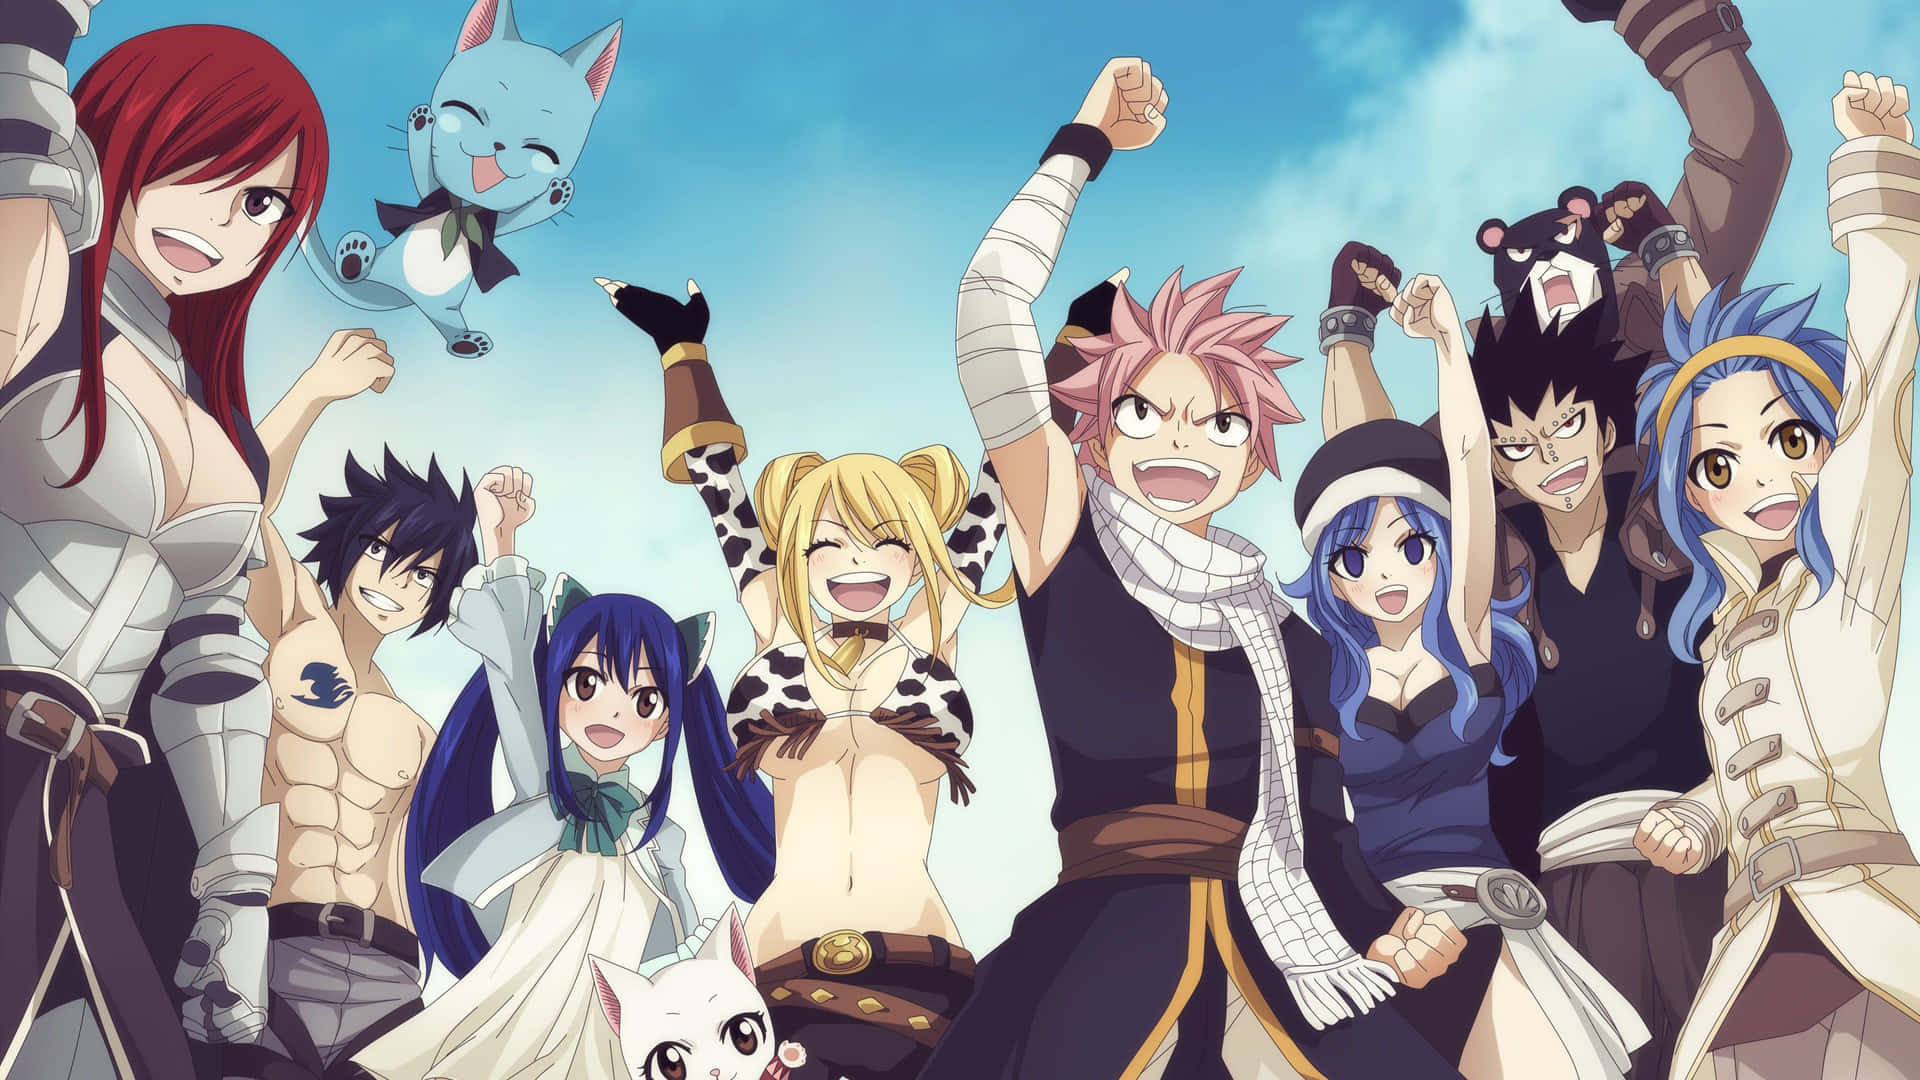 Celebrating Friendship and Magic in Fairy Tail